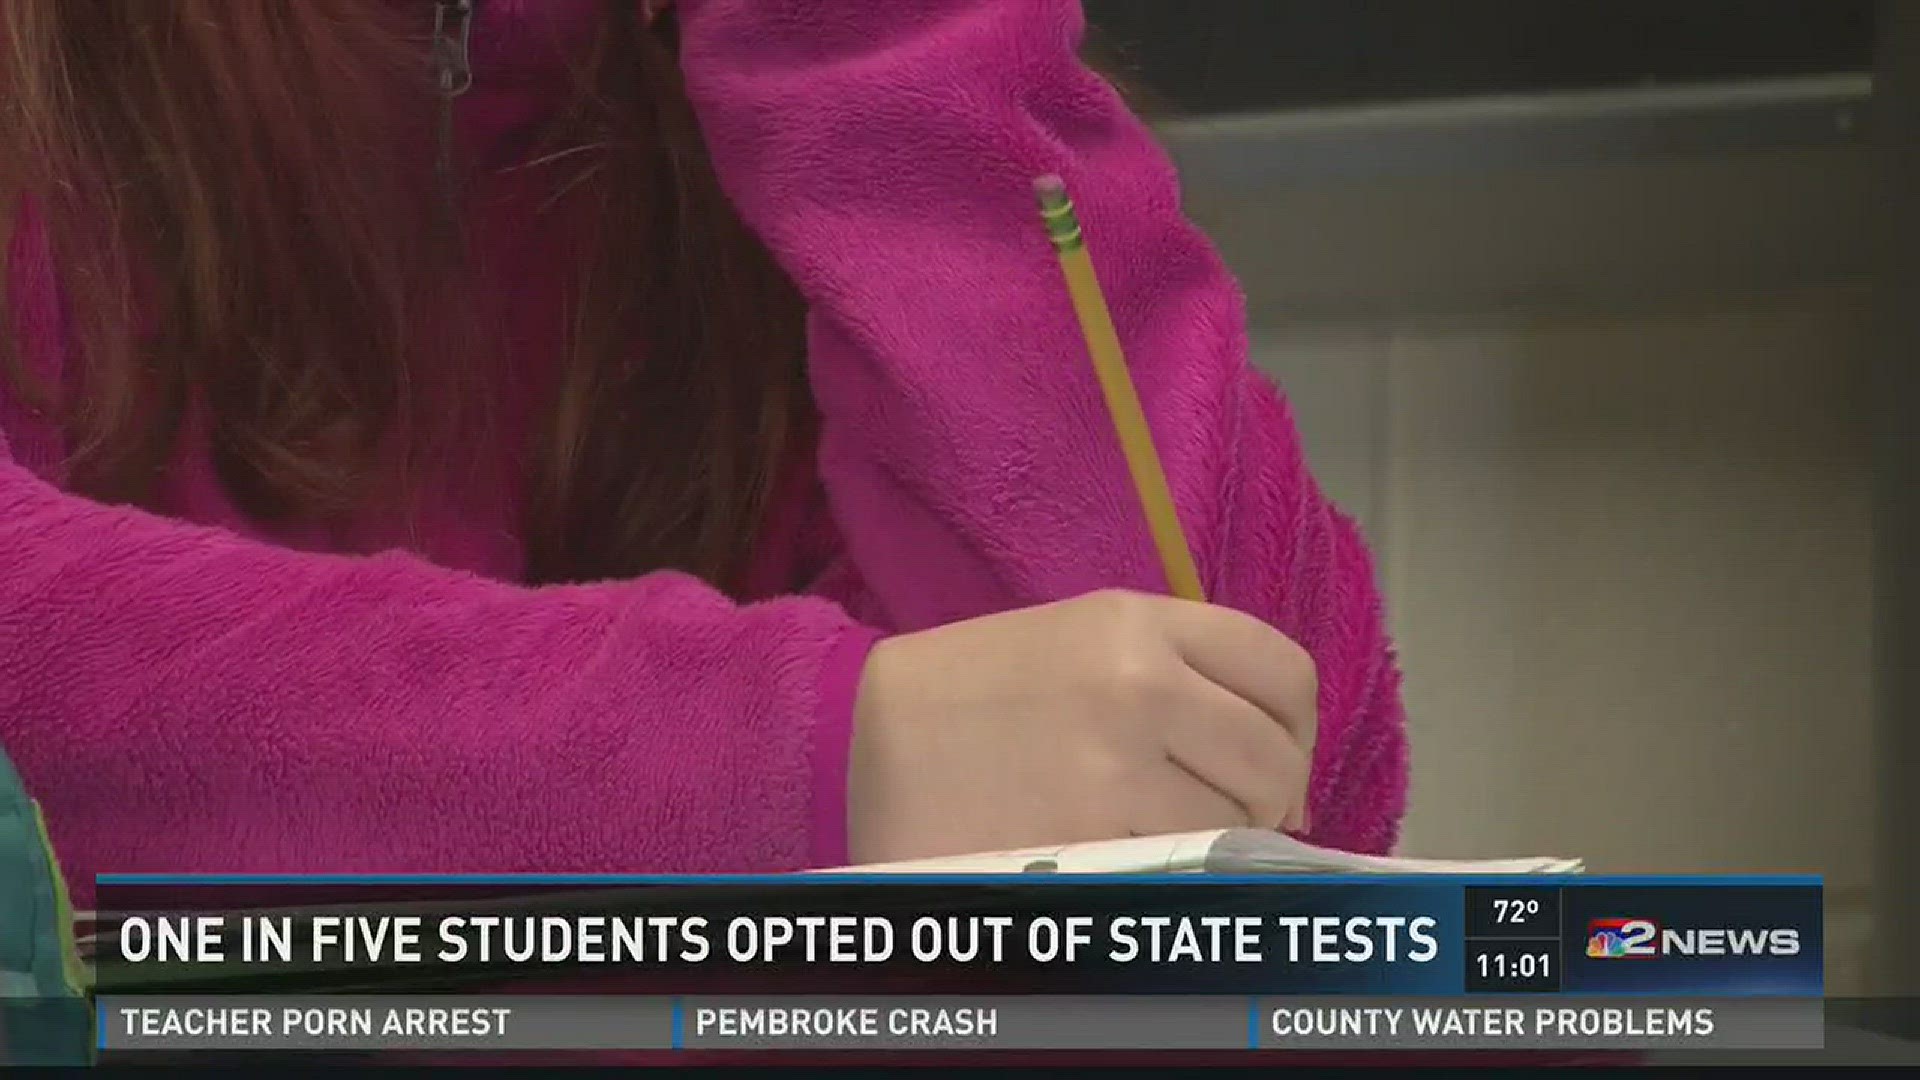 ONE IN FIVE STUDENTS OPTED OUT OF STATE TESTS